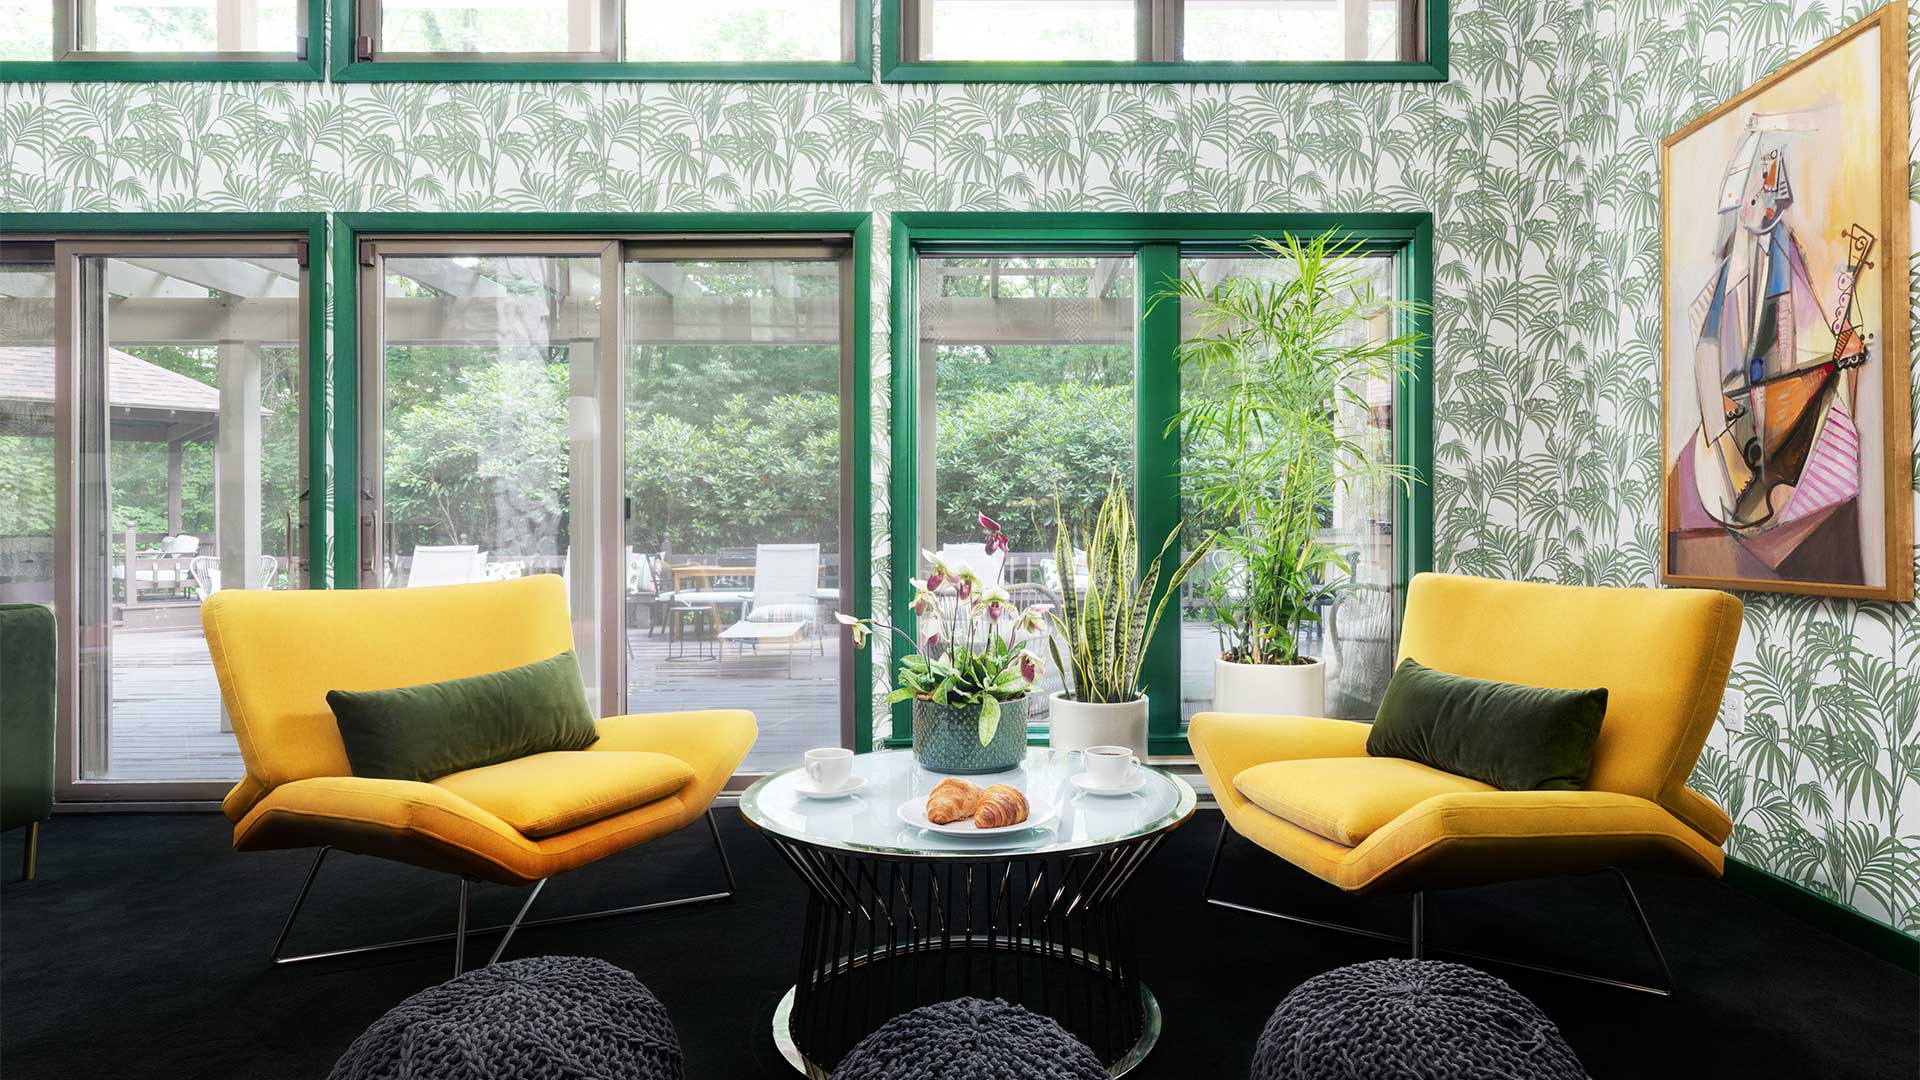 a sitting area with two canary yellow retro-inspired chairs. There is a circular table in between the two chairs with potted plants resting on top. There is a sliding glass door leading out to a patio.